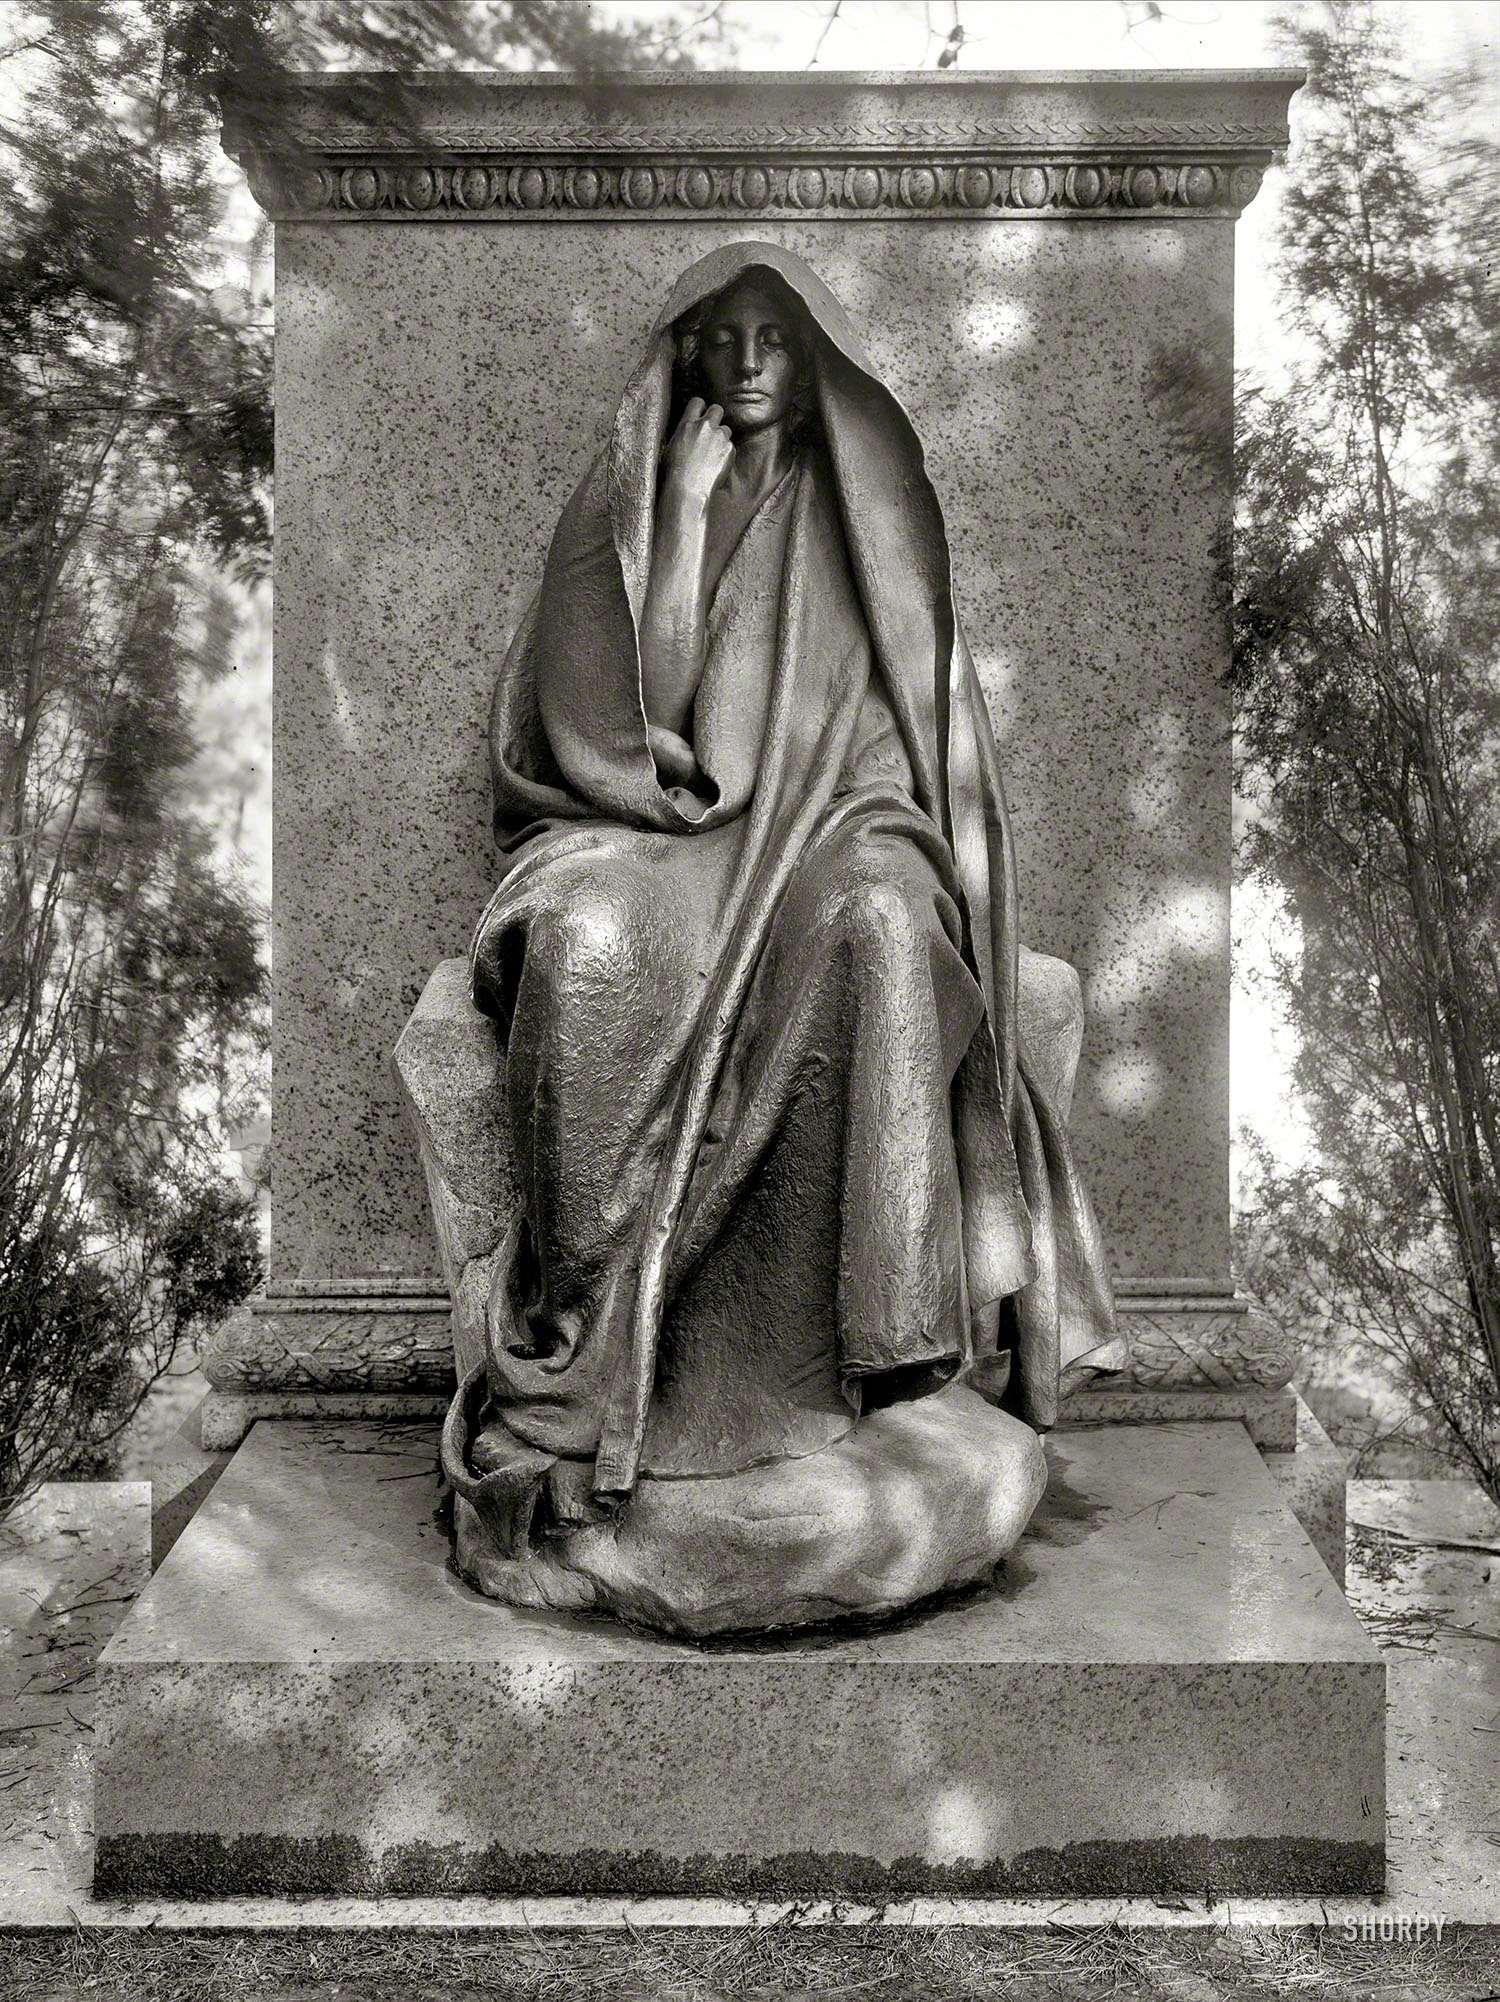 Washington, D.C., circa 1915. "Grief monument, Rock Creek cemetery." The timeless memorial by Augustus Saint-Gaudens. National Photo. View full size.